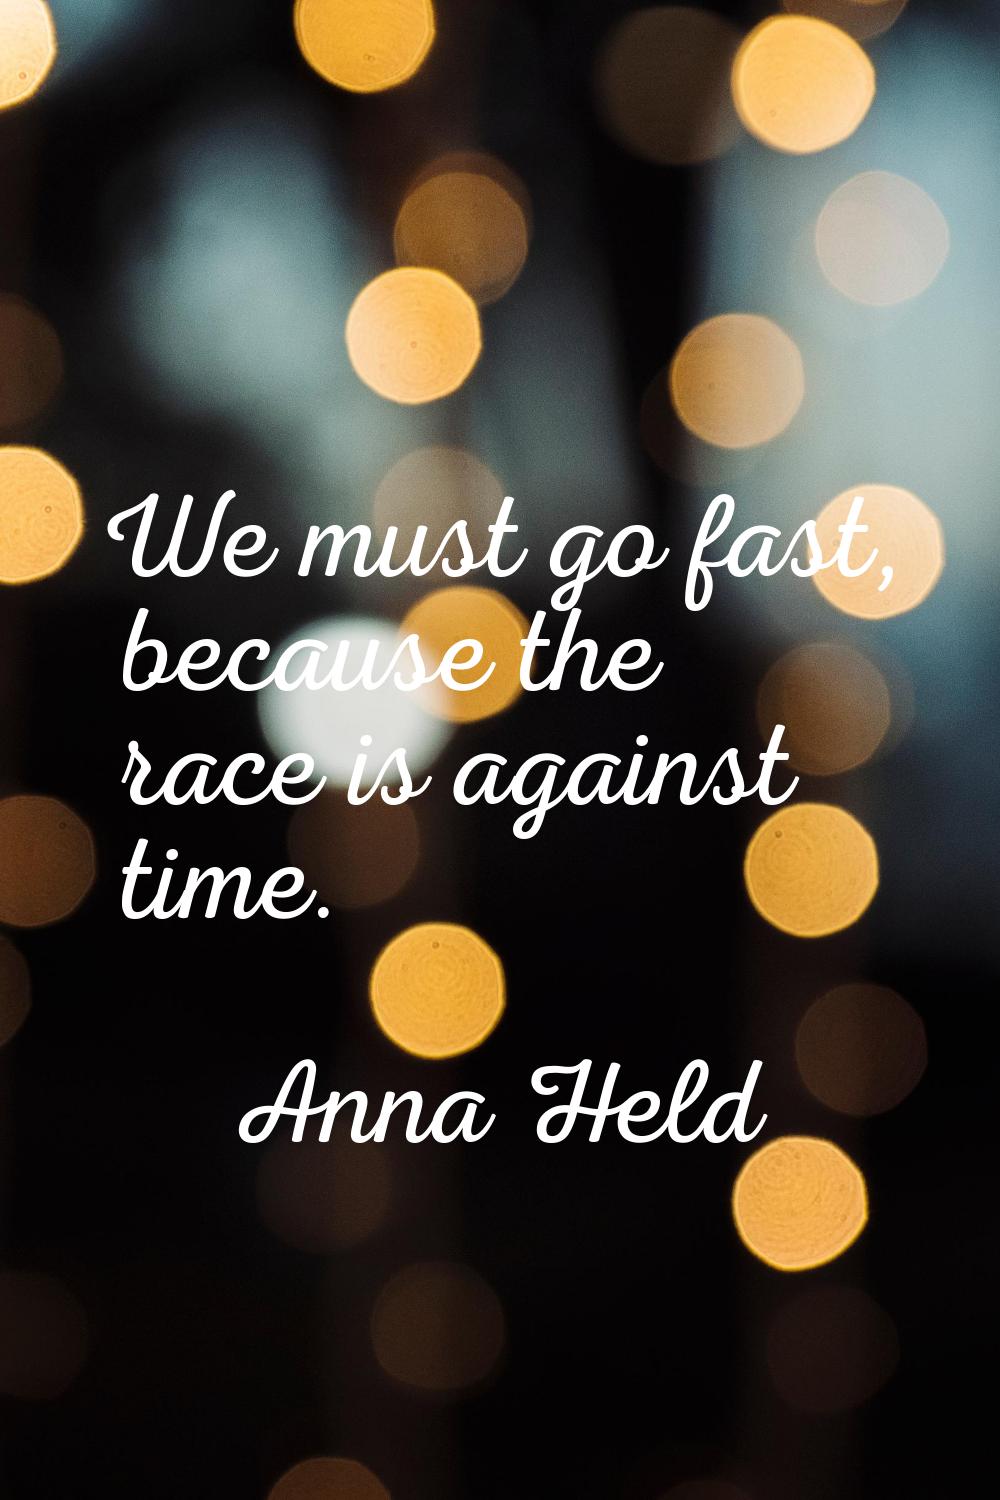 We must go fast, because the race is against time.